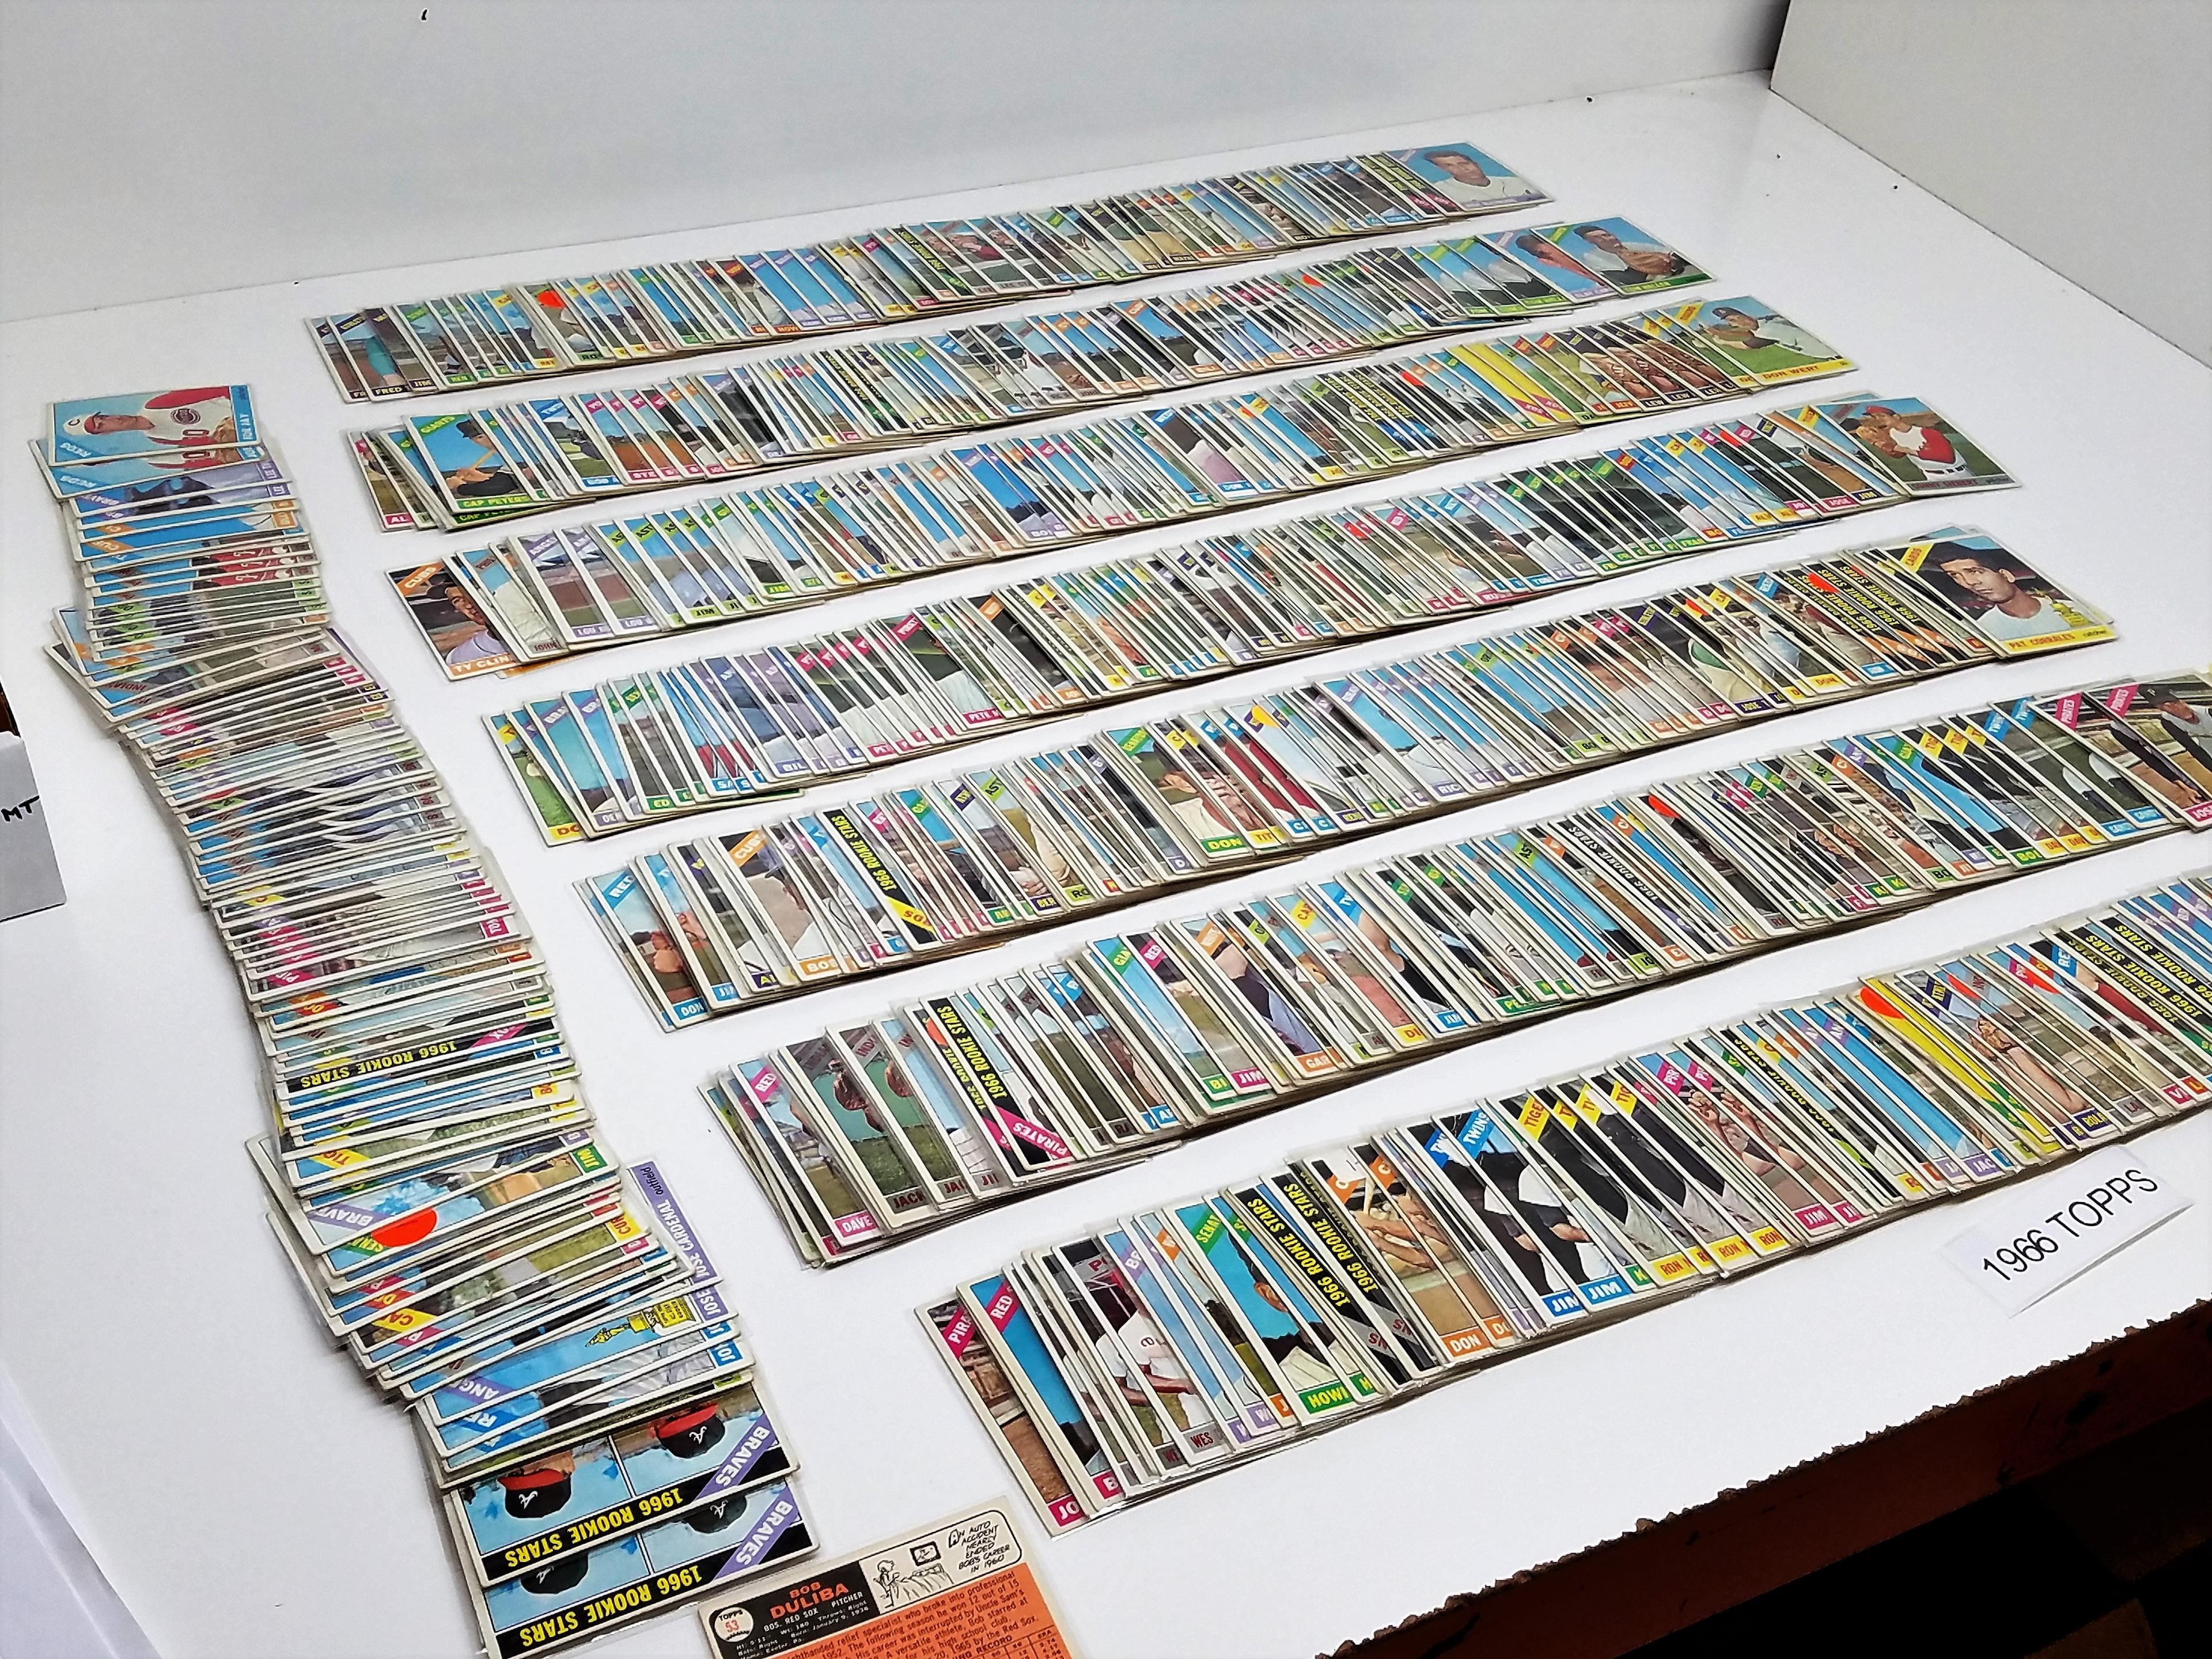 lot of (716) 1966 TOPPS baseball cards, incl some dups, VG to NM, avg is EX, 586 Series 1 numbers, 8